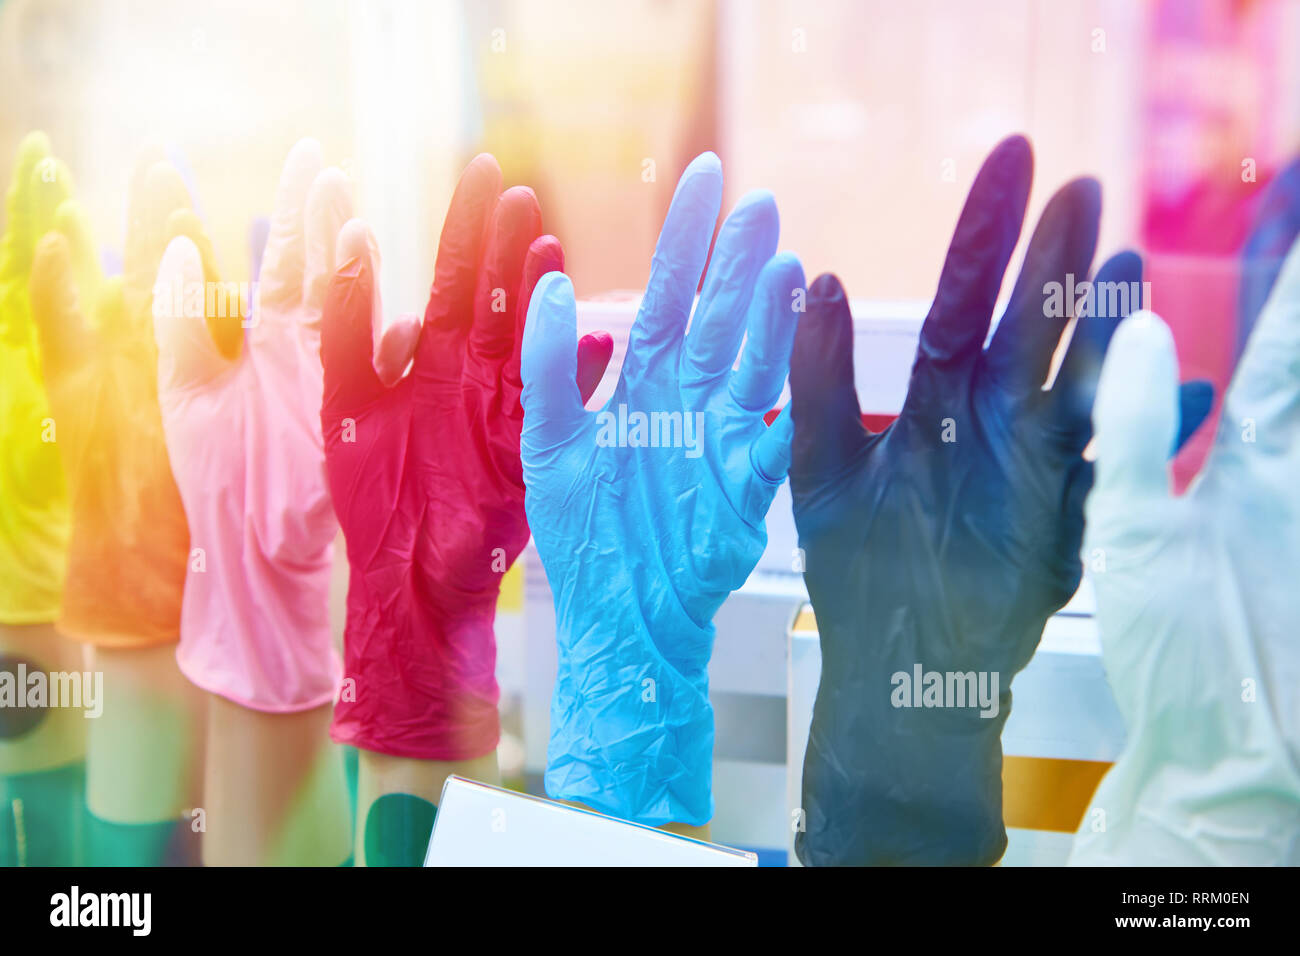 Colorful medical rubber gloves Stock Photo